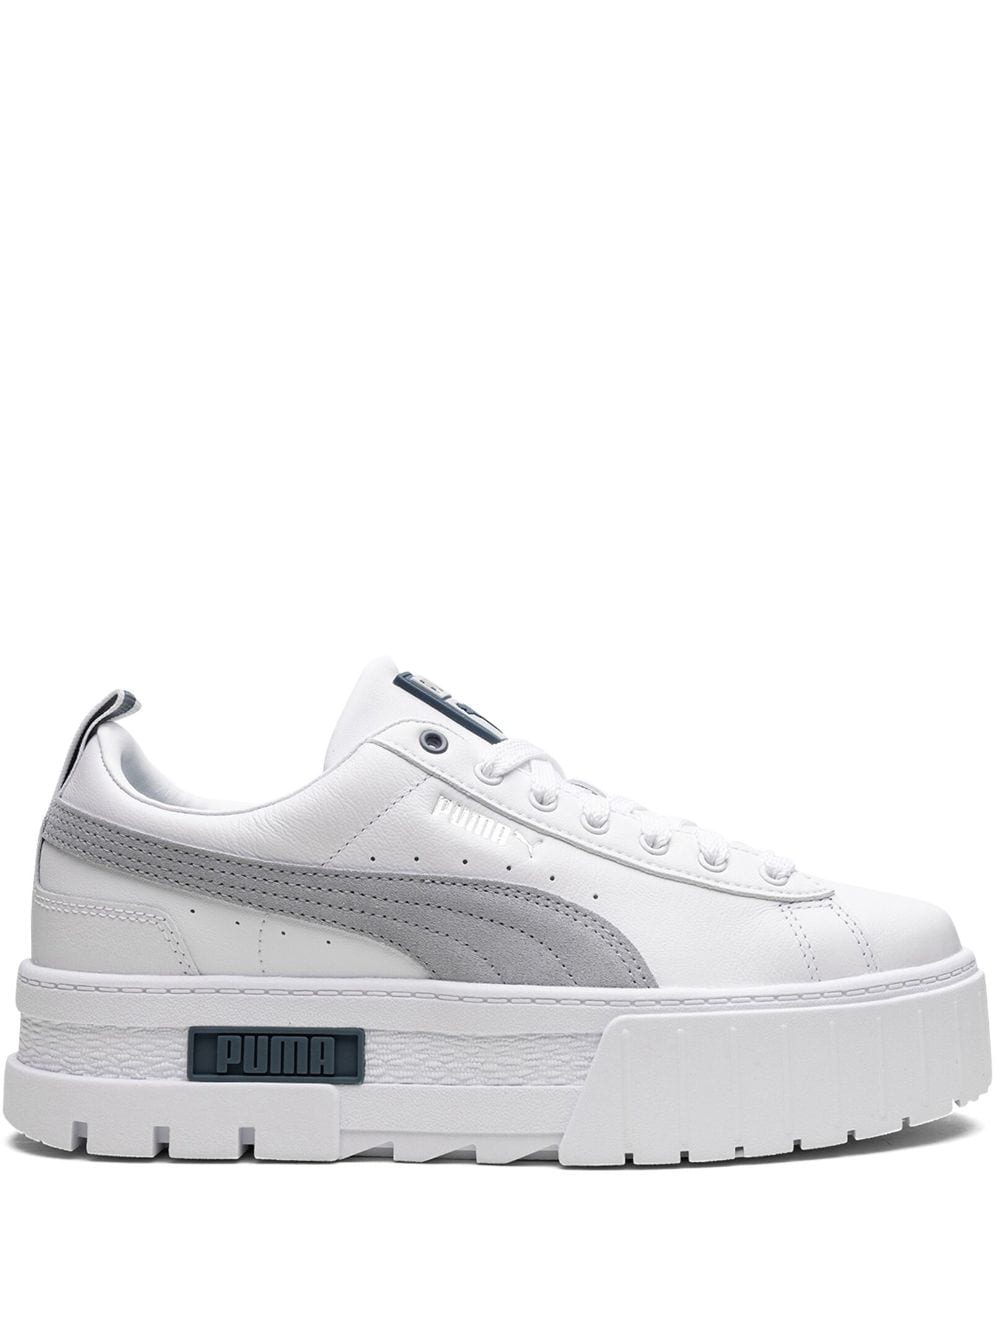 Puma Mayze Leather "platinum Gray" Sneakers In White